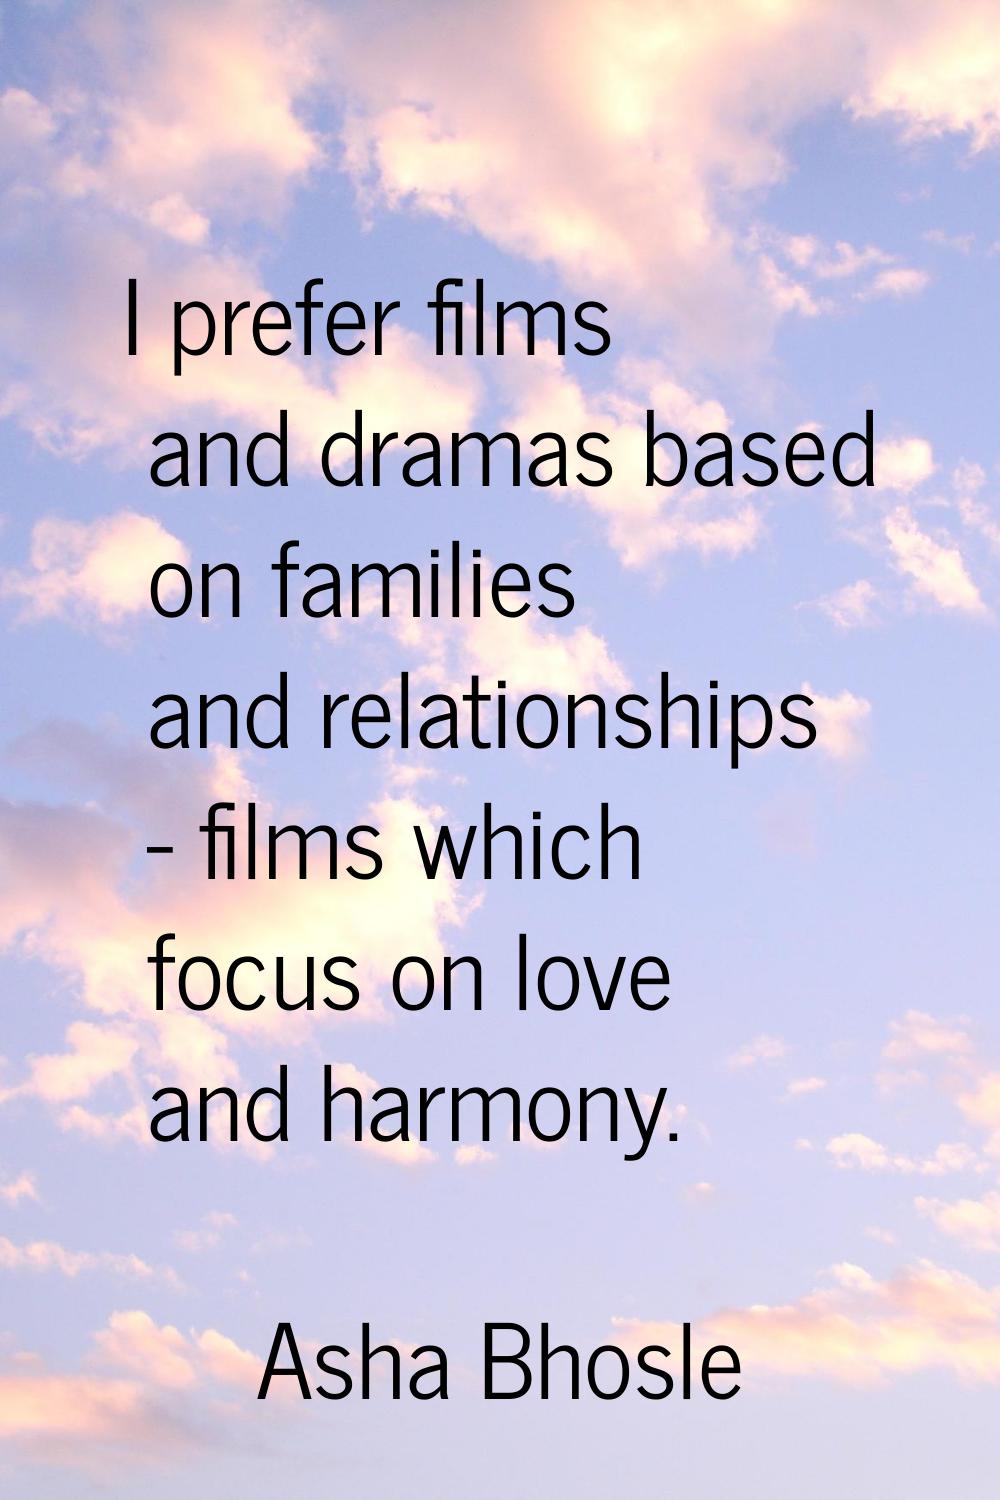 I prefer films and dramas based on families and relationships - films which focus on love and harmo